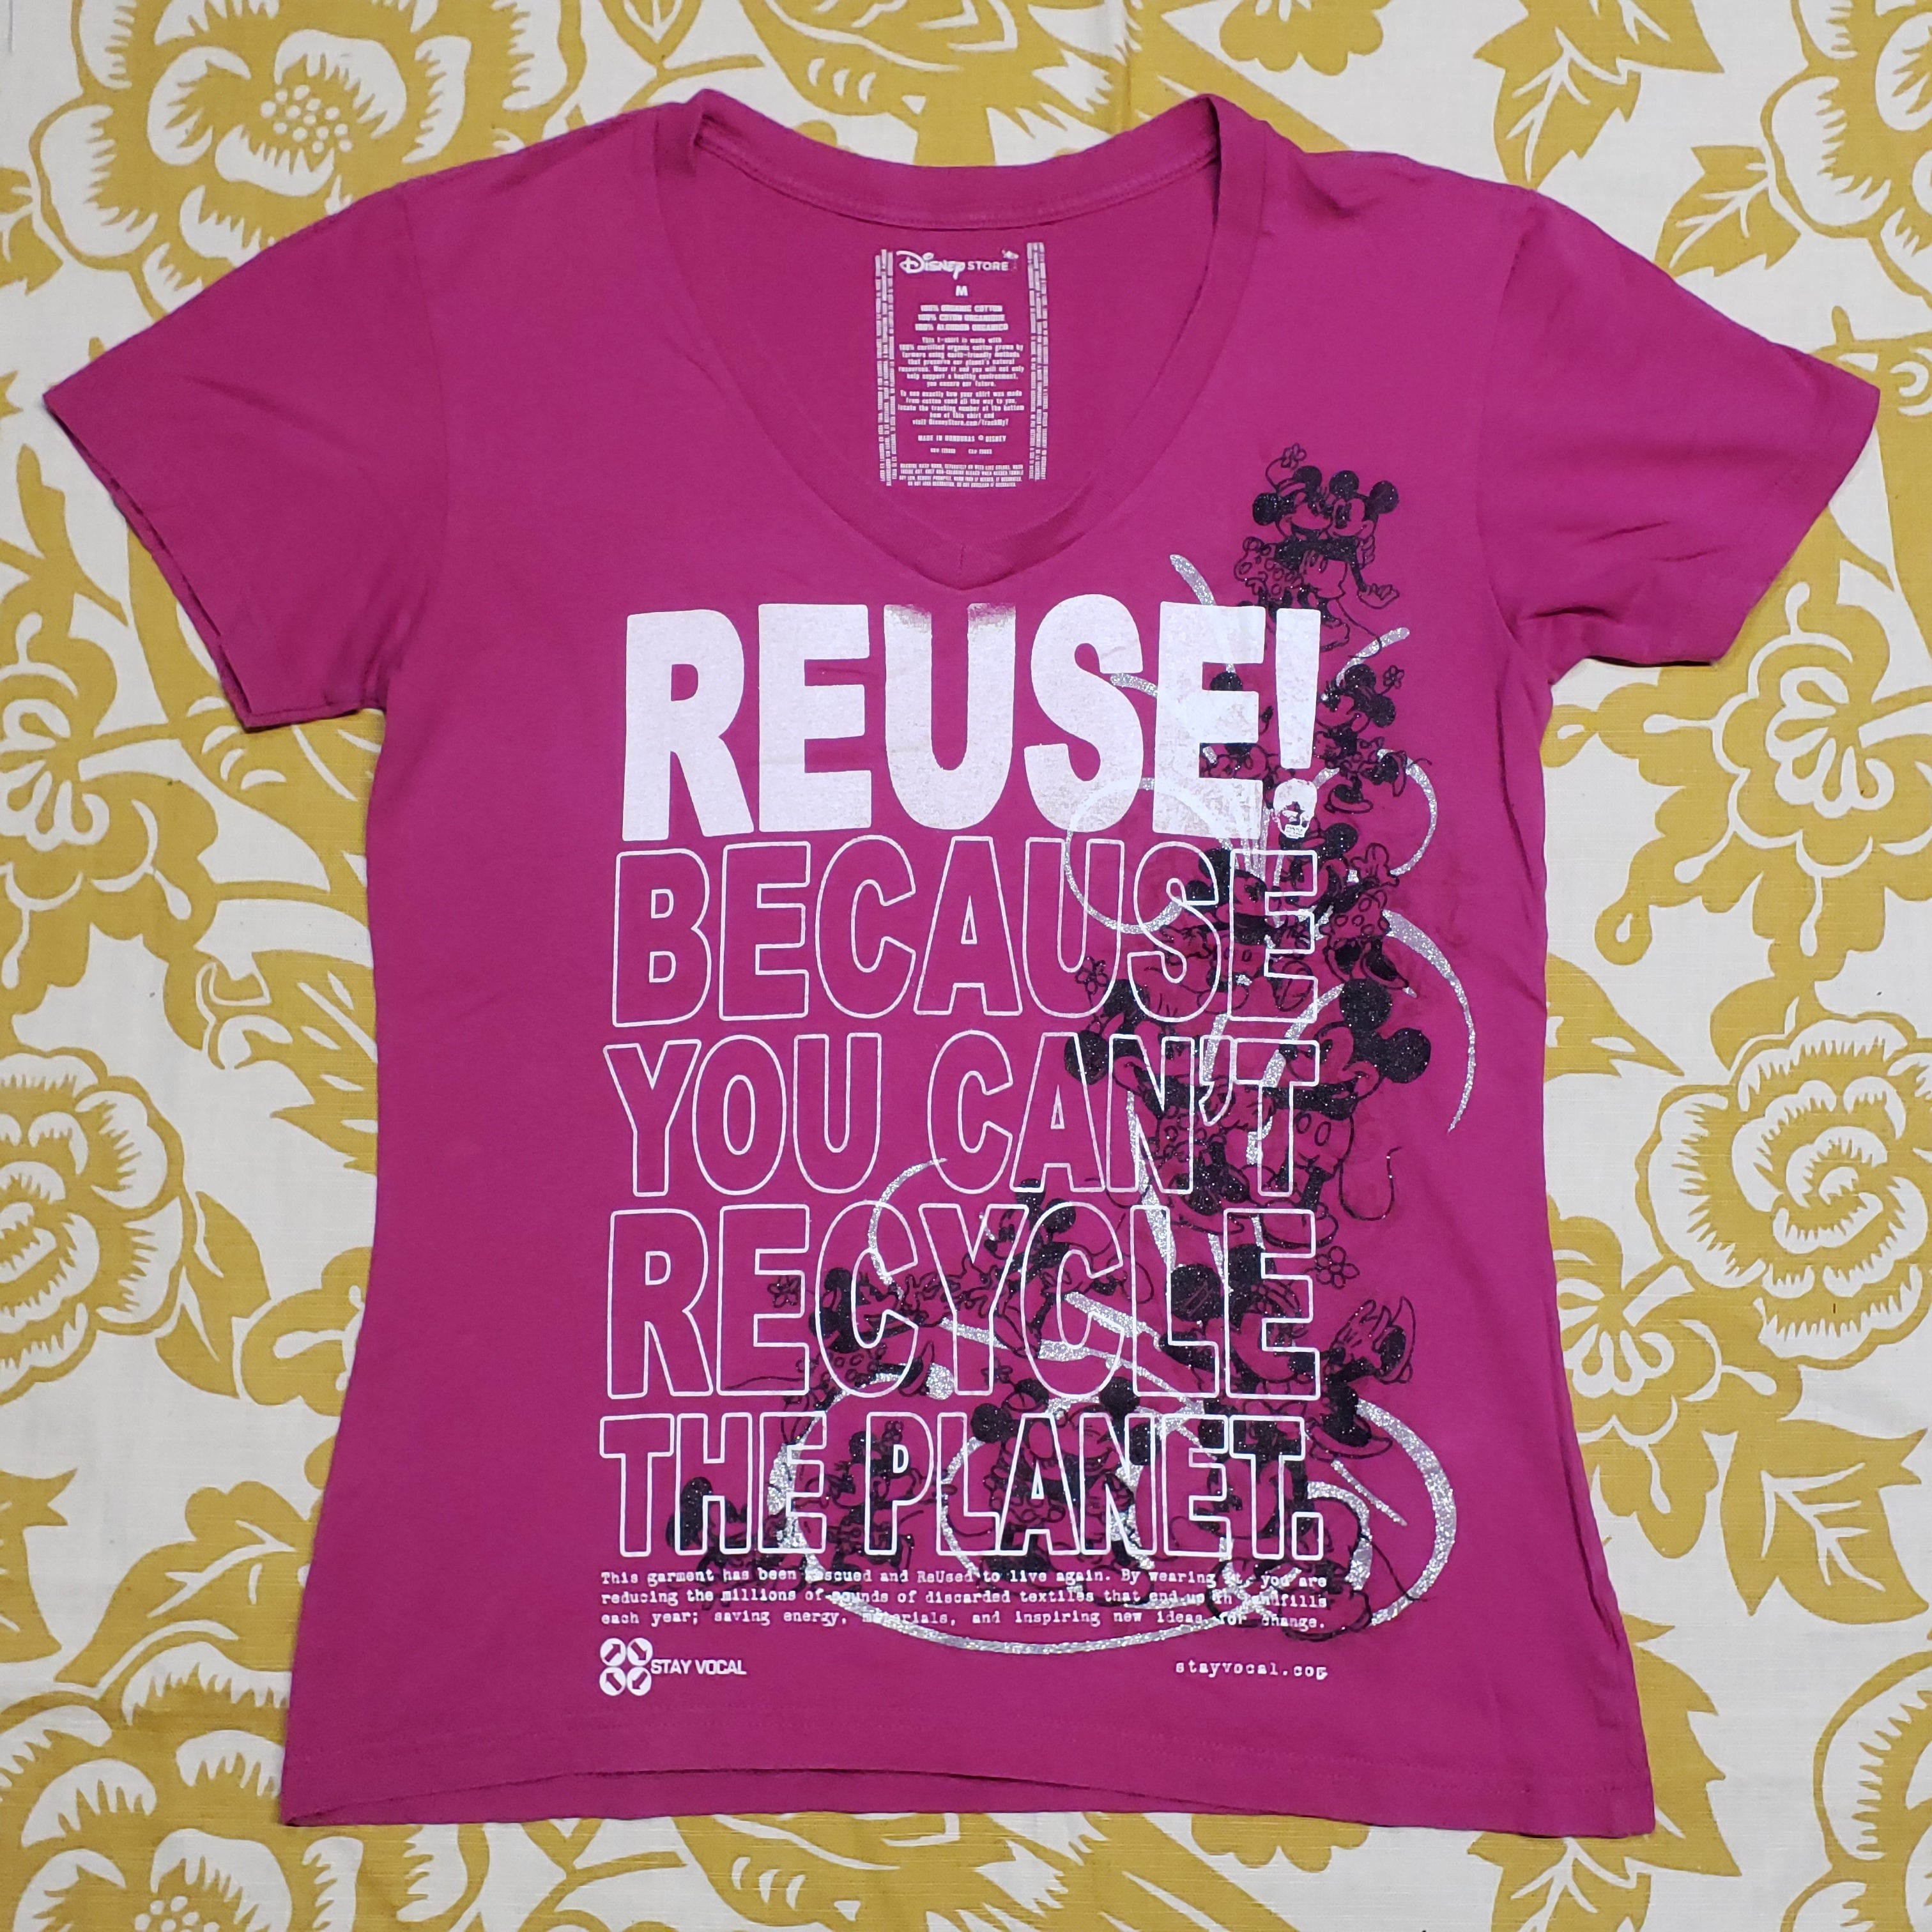 One of a Kind (Women's M) REUSE! Mickey & Minnie Side Dancing T-Shirt